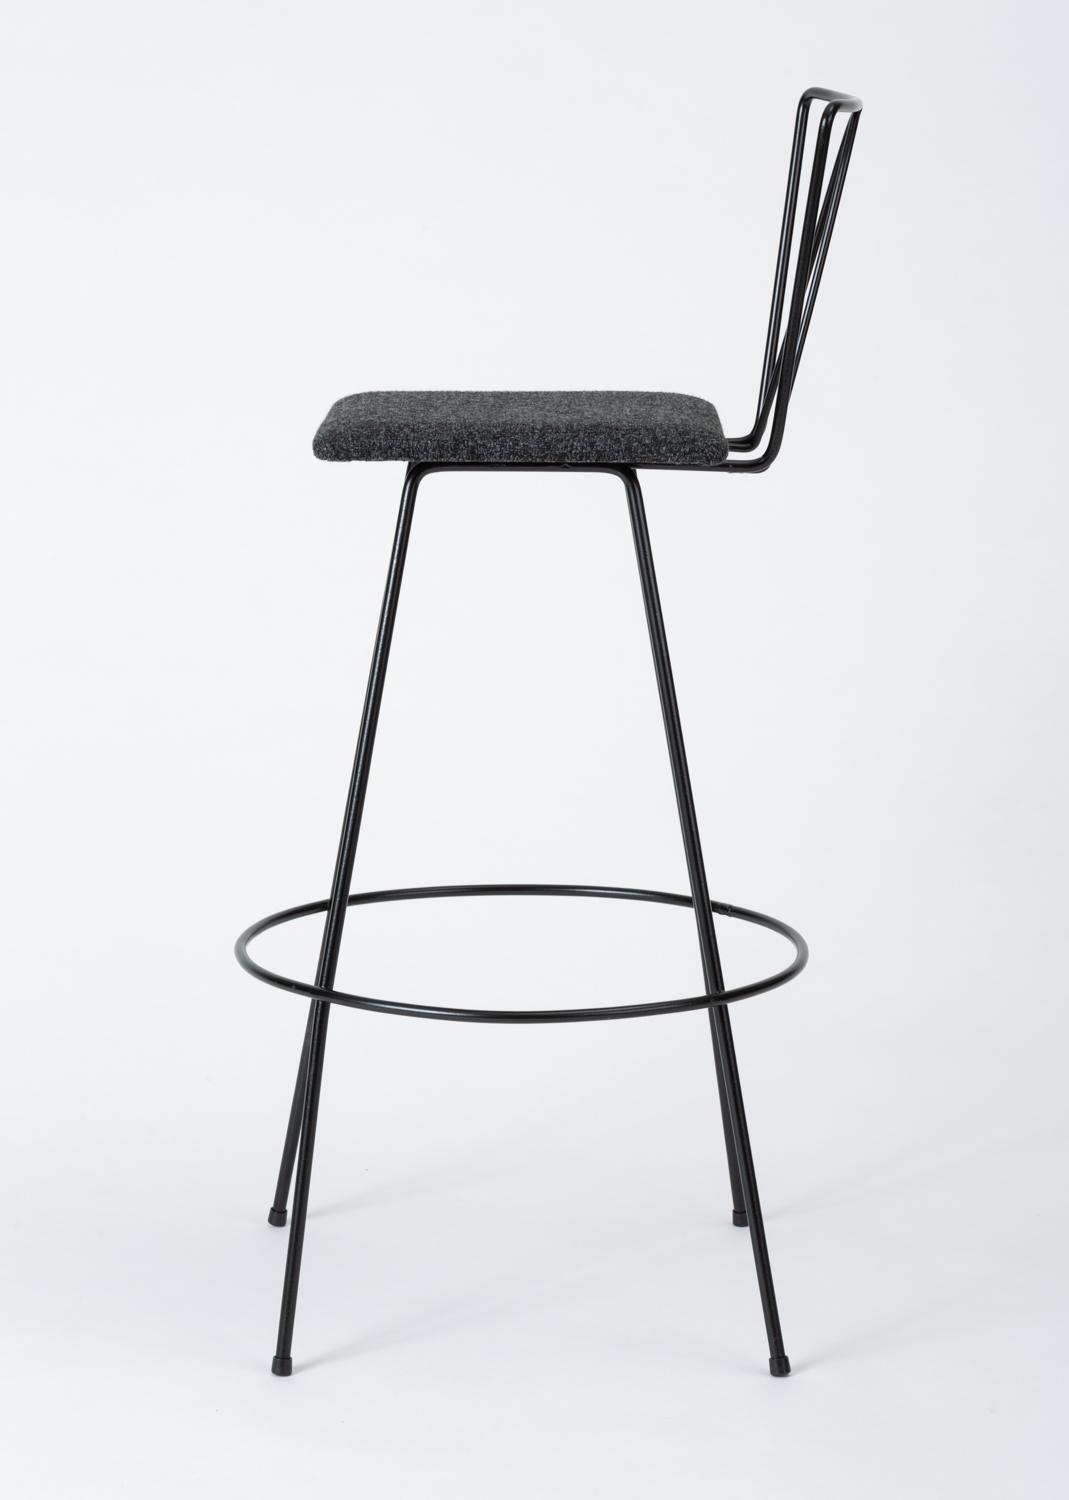 Powder-Coated Frederick Weinberg Style Modernist Wire Bar Stool For Sale